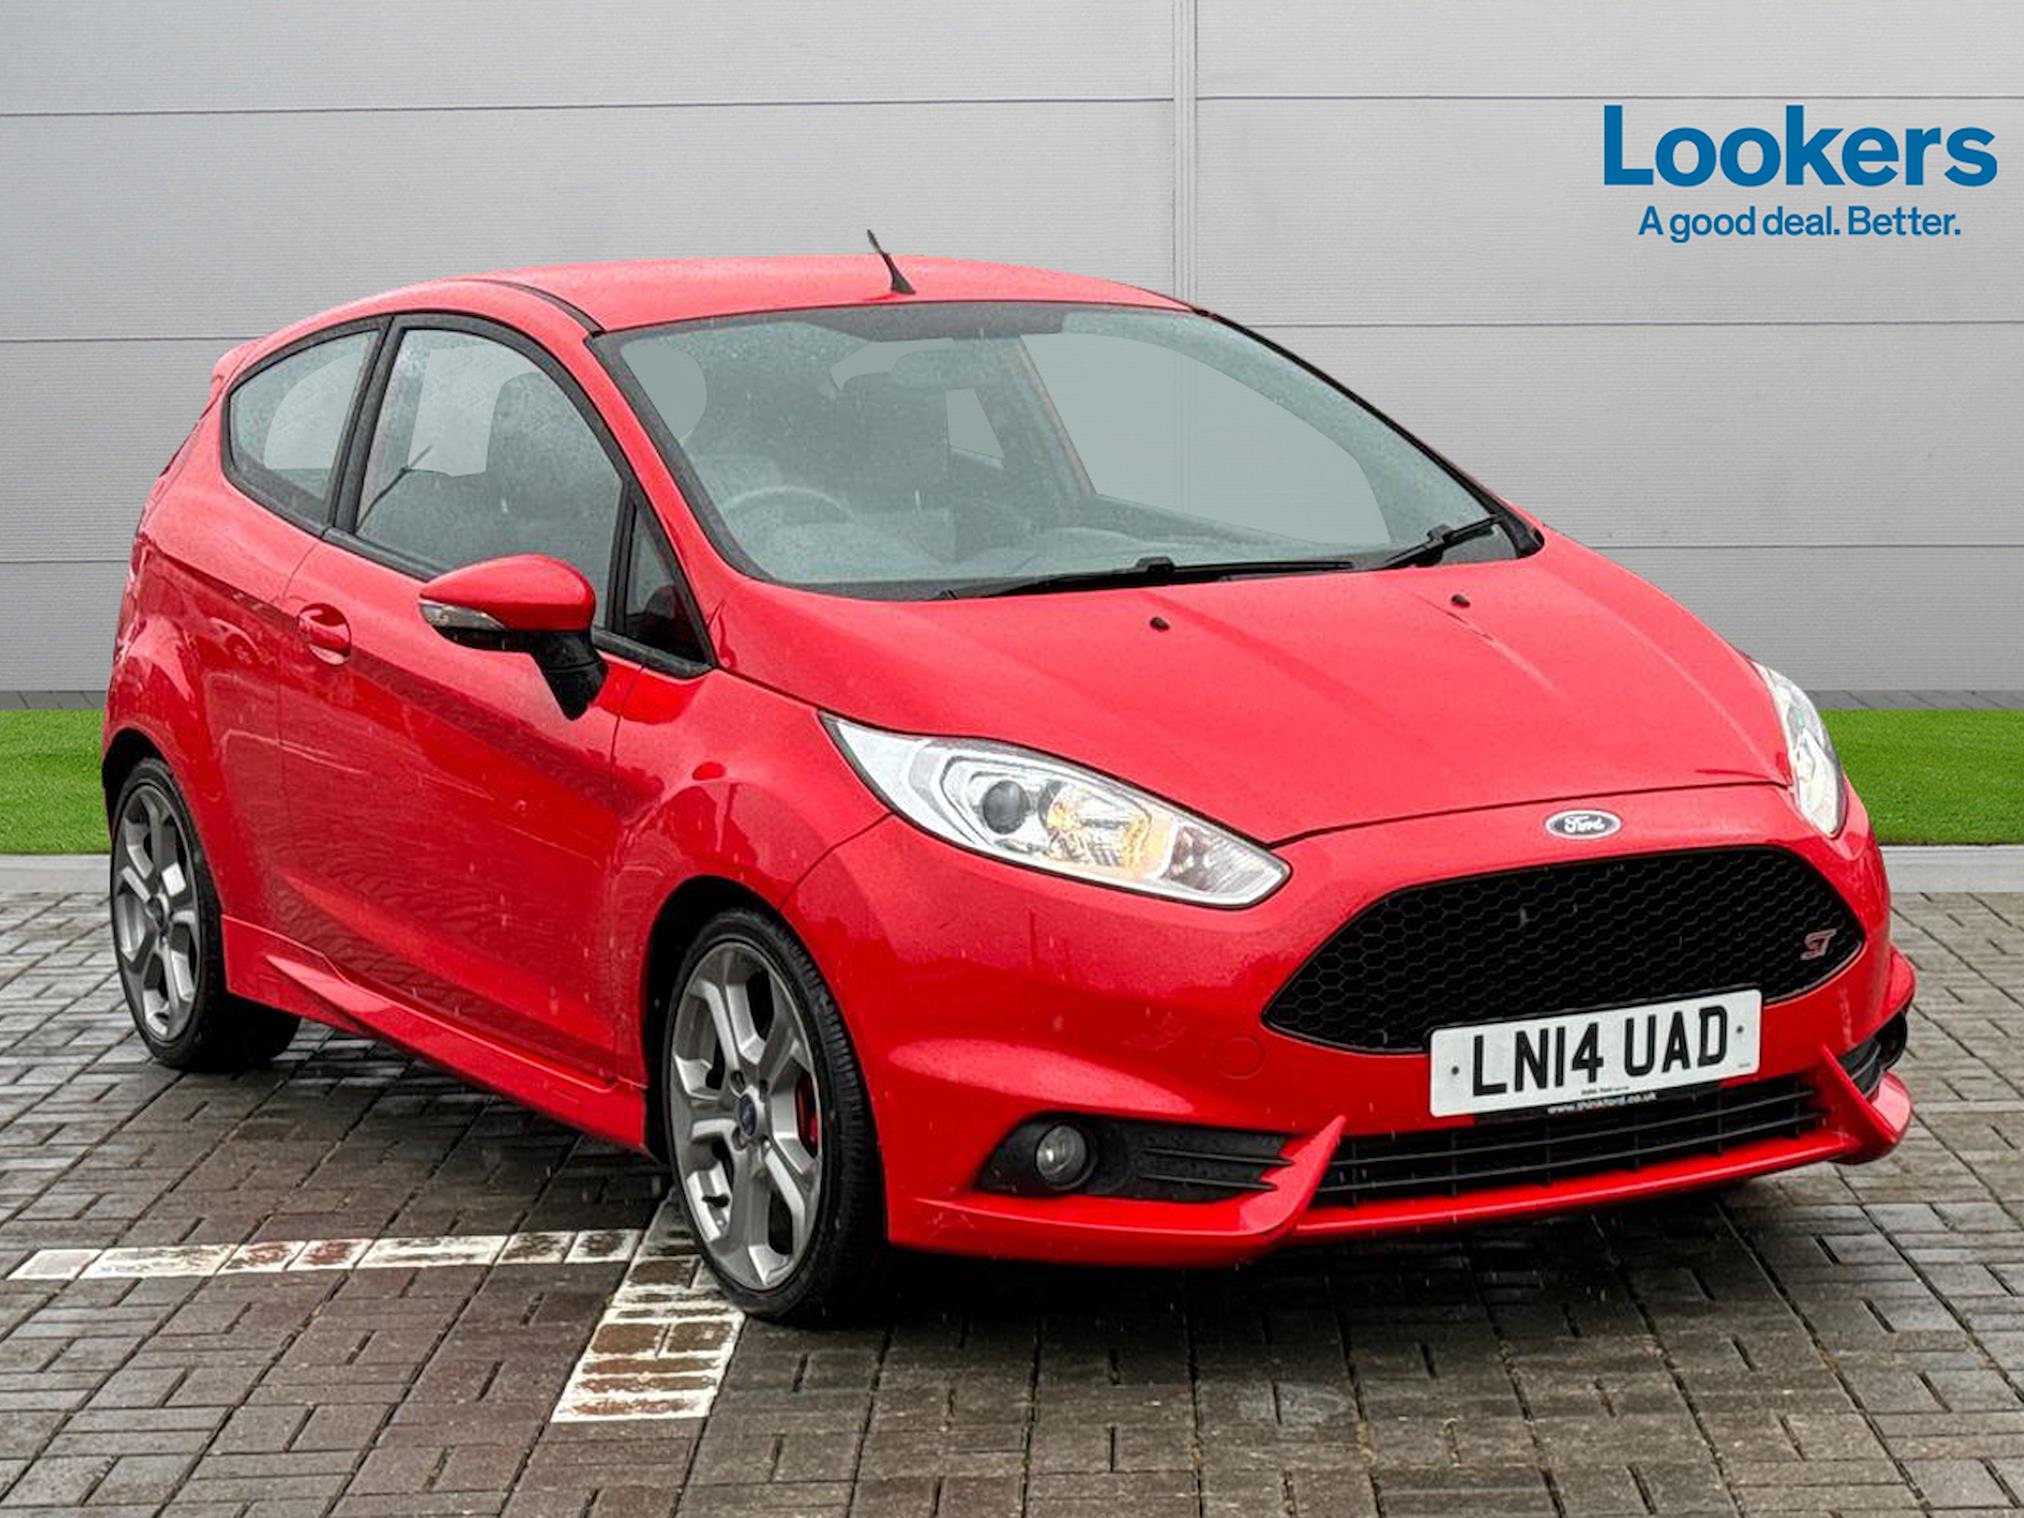 Used FORD FIESTA 1.6 Ecoboost St 3Dr 2014